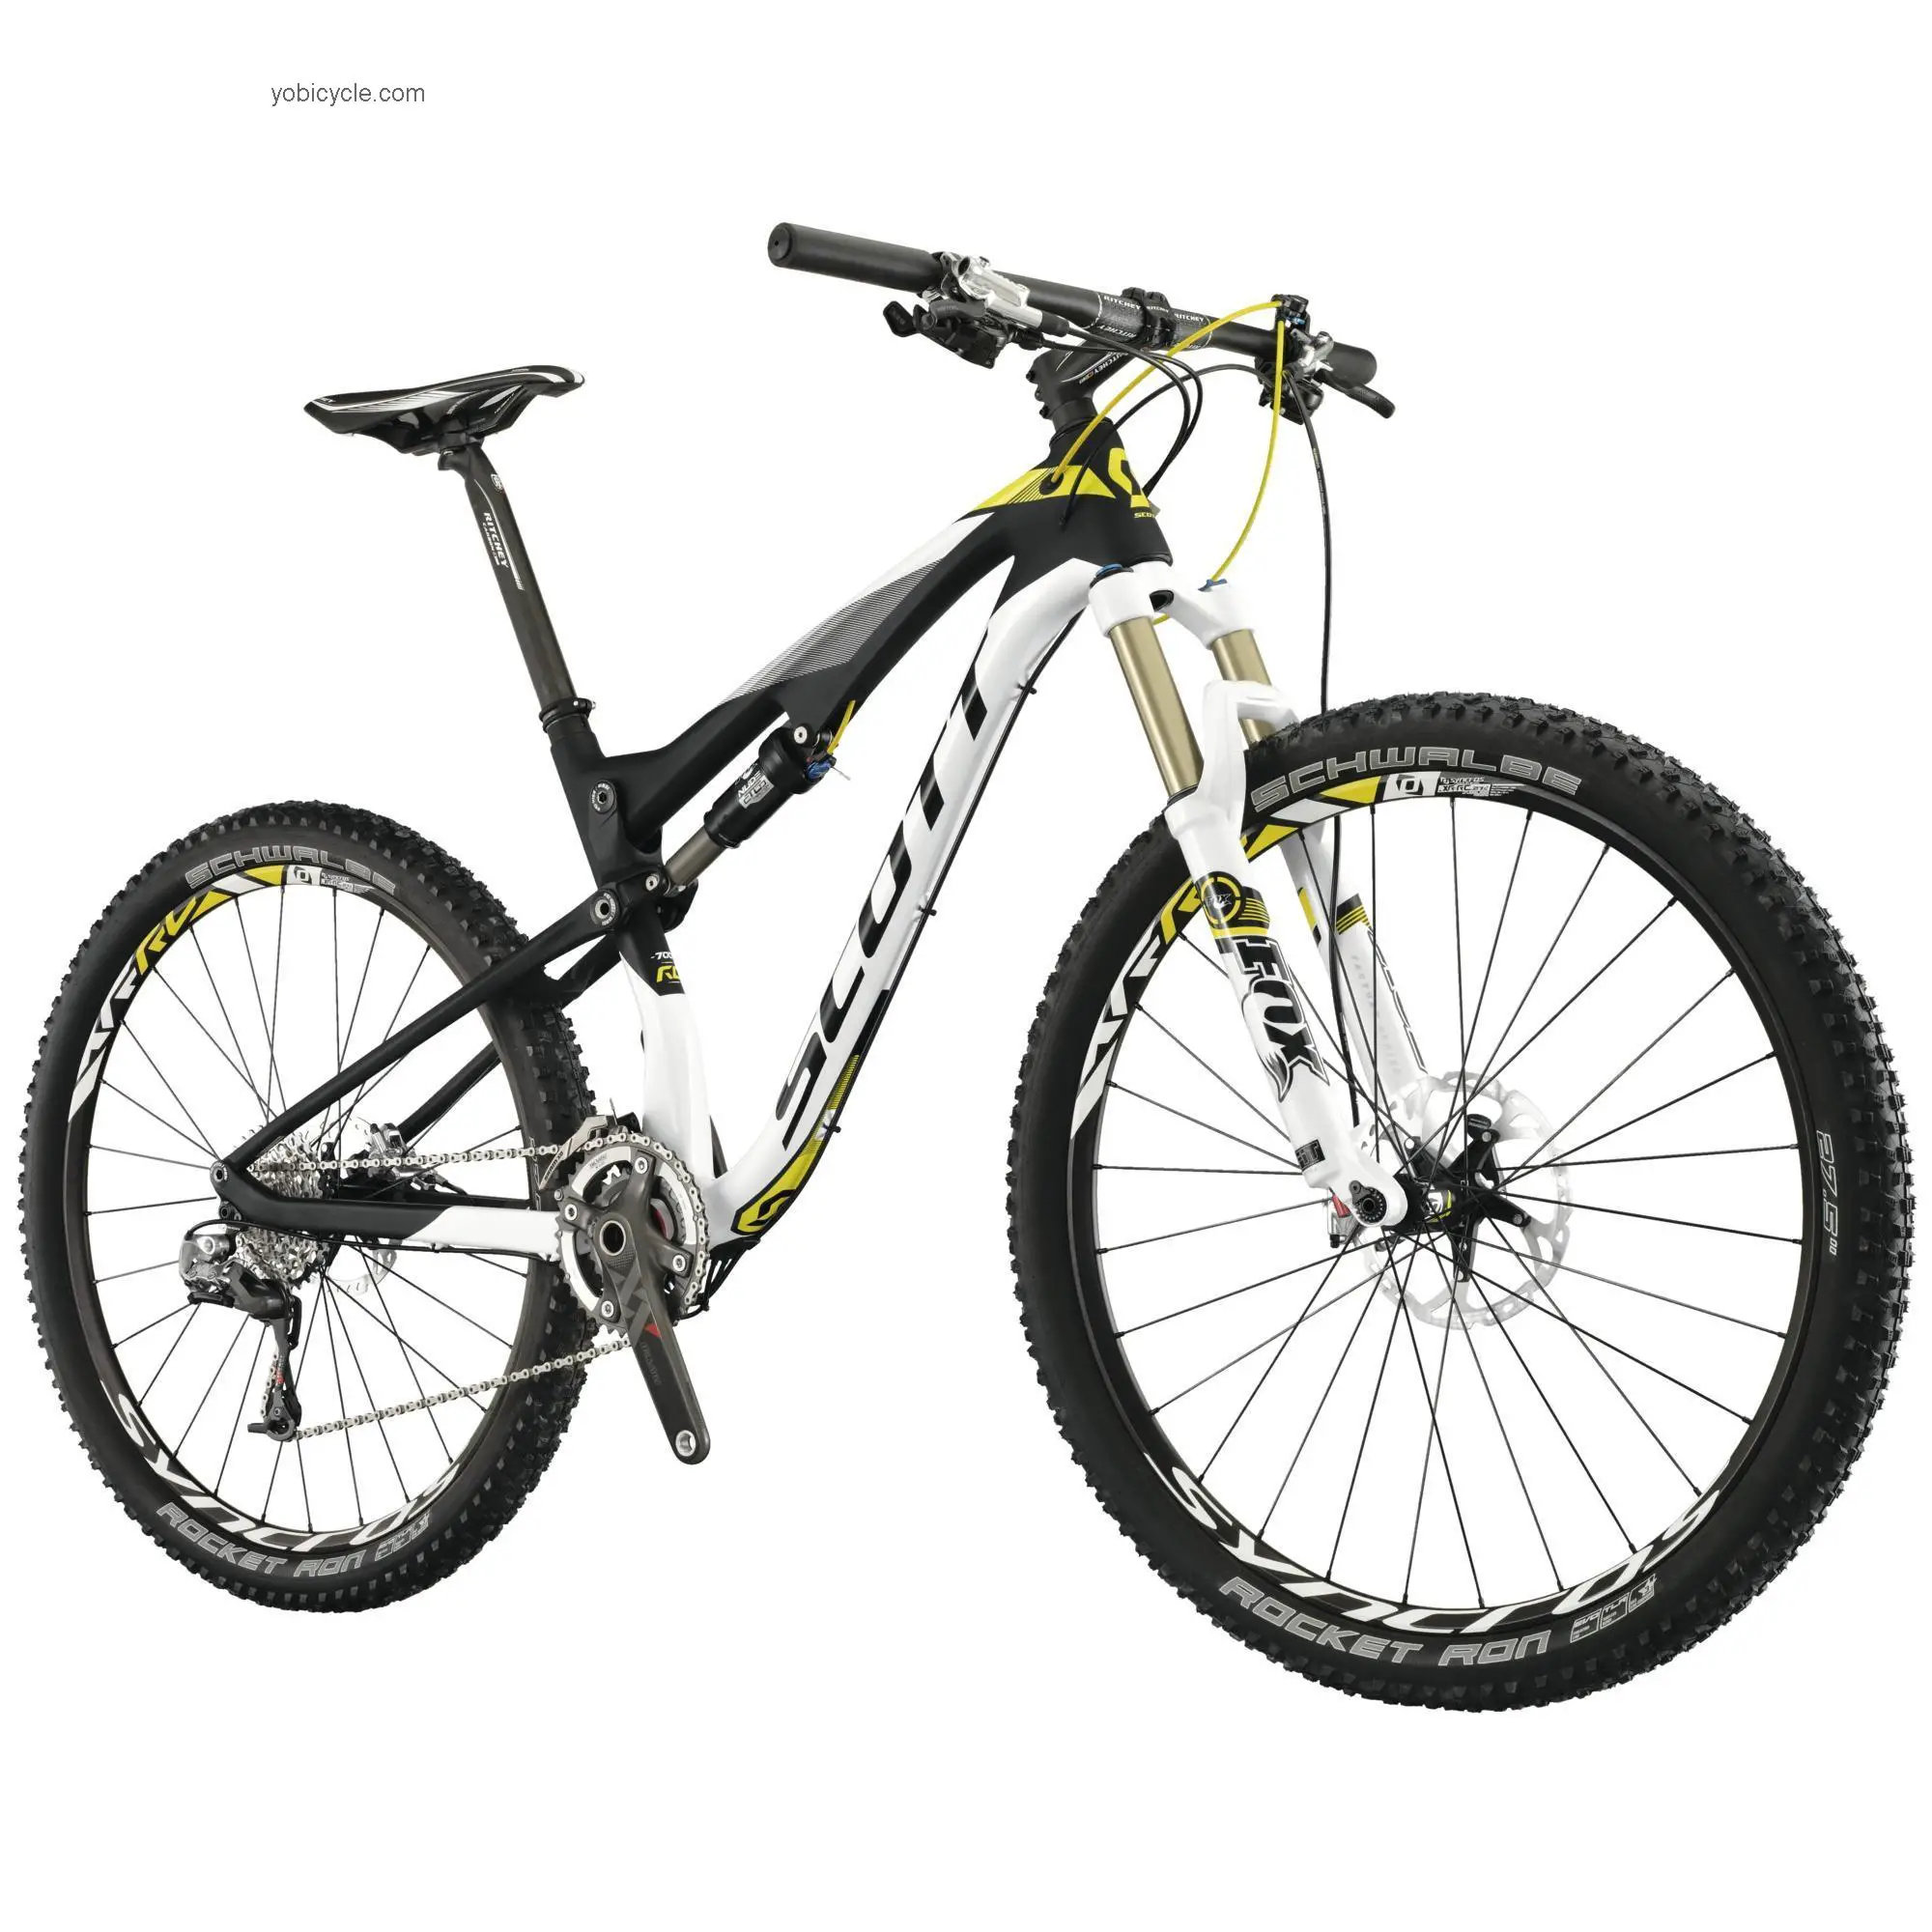 Scott Spark 700 RC competitors and comparison tool online specs and performance